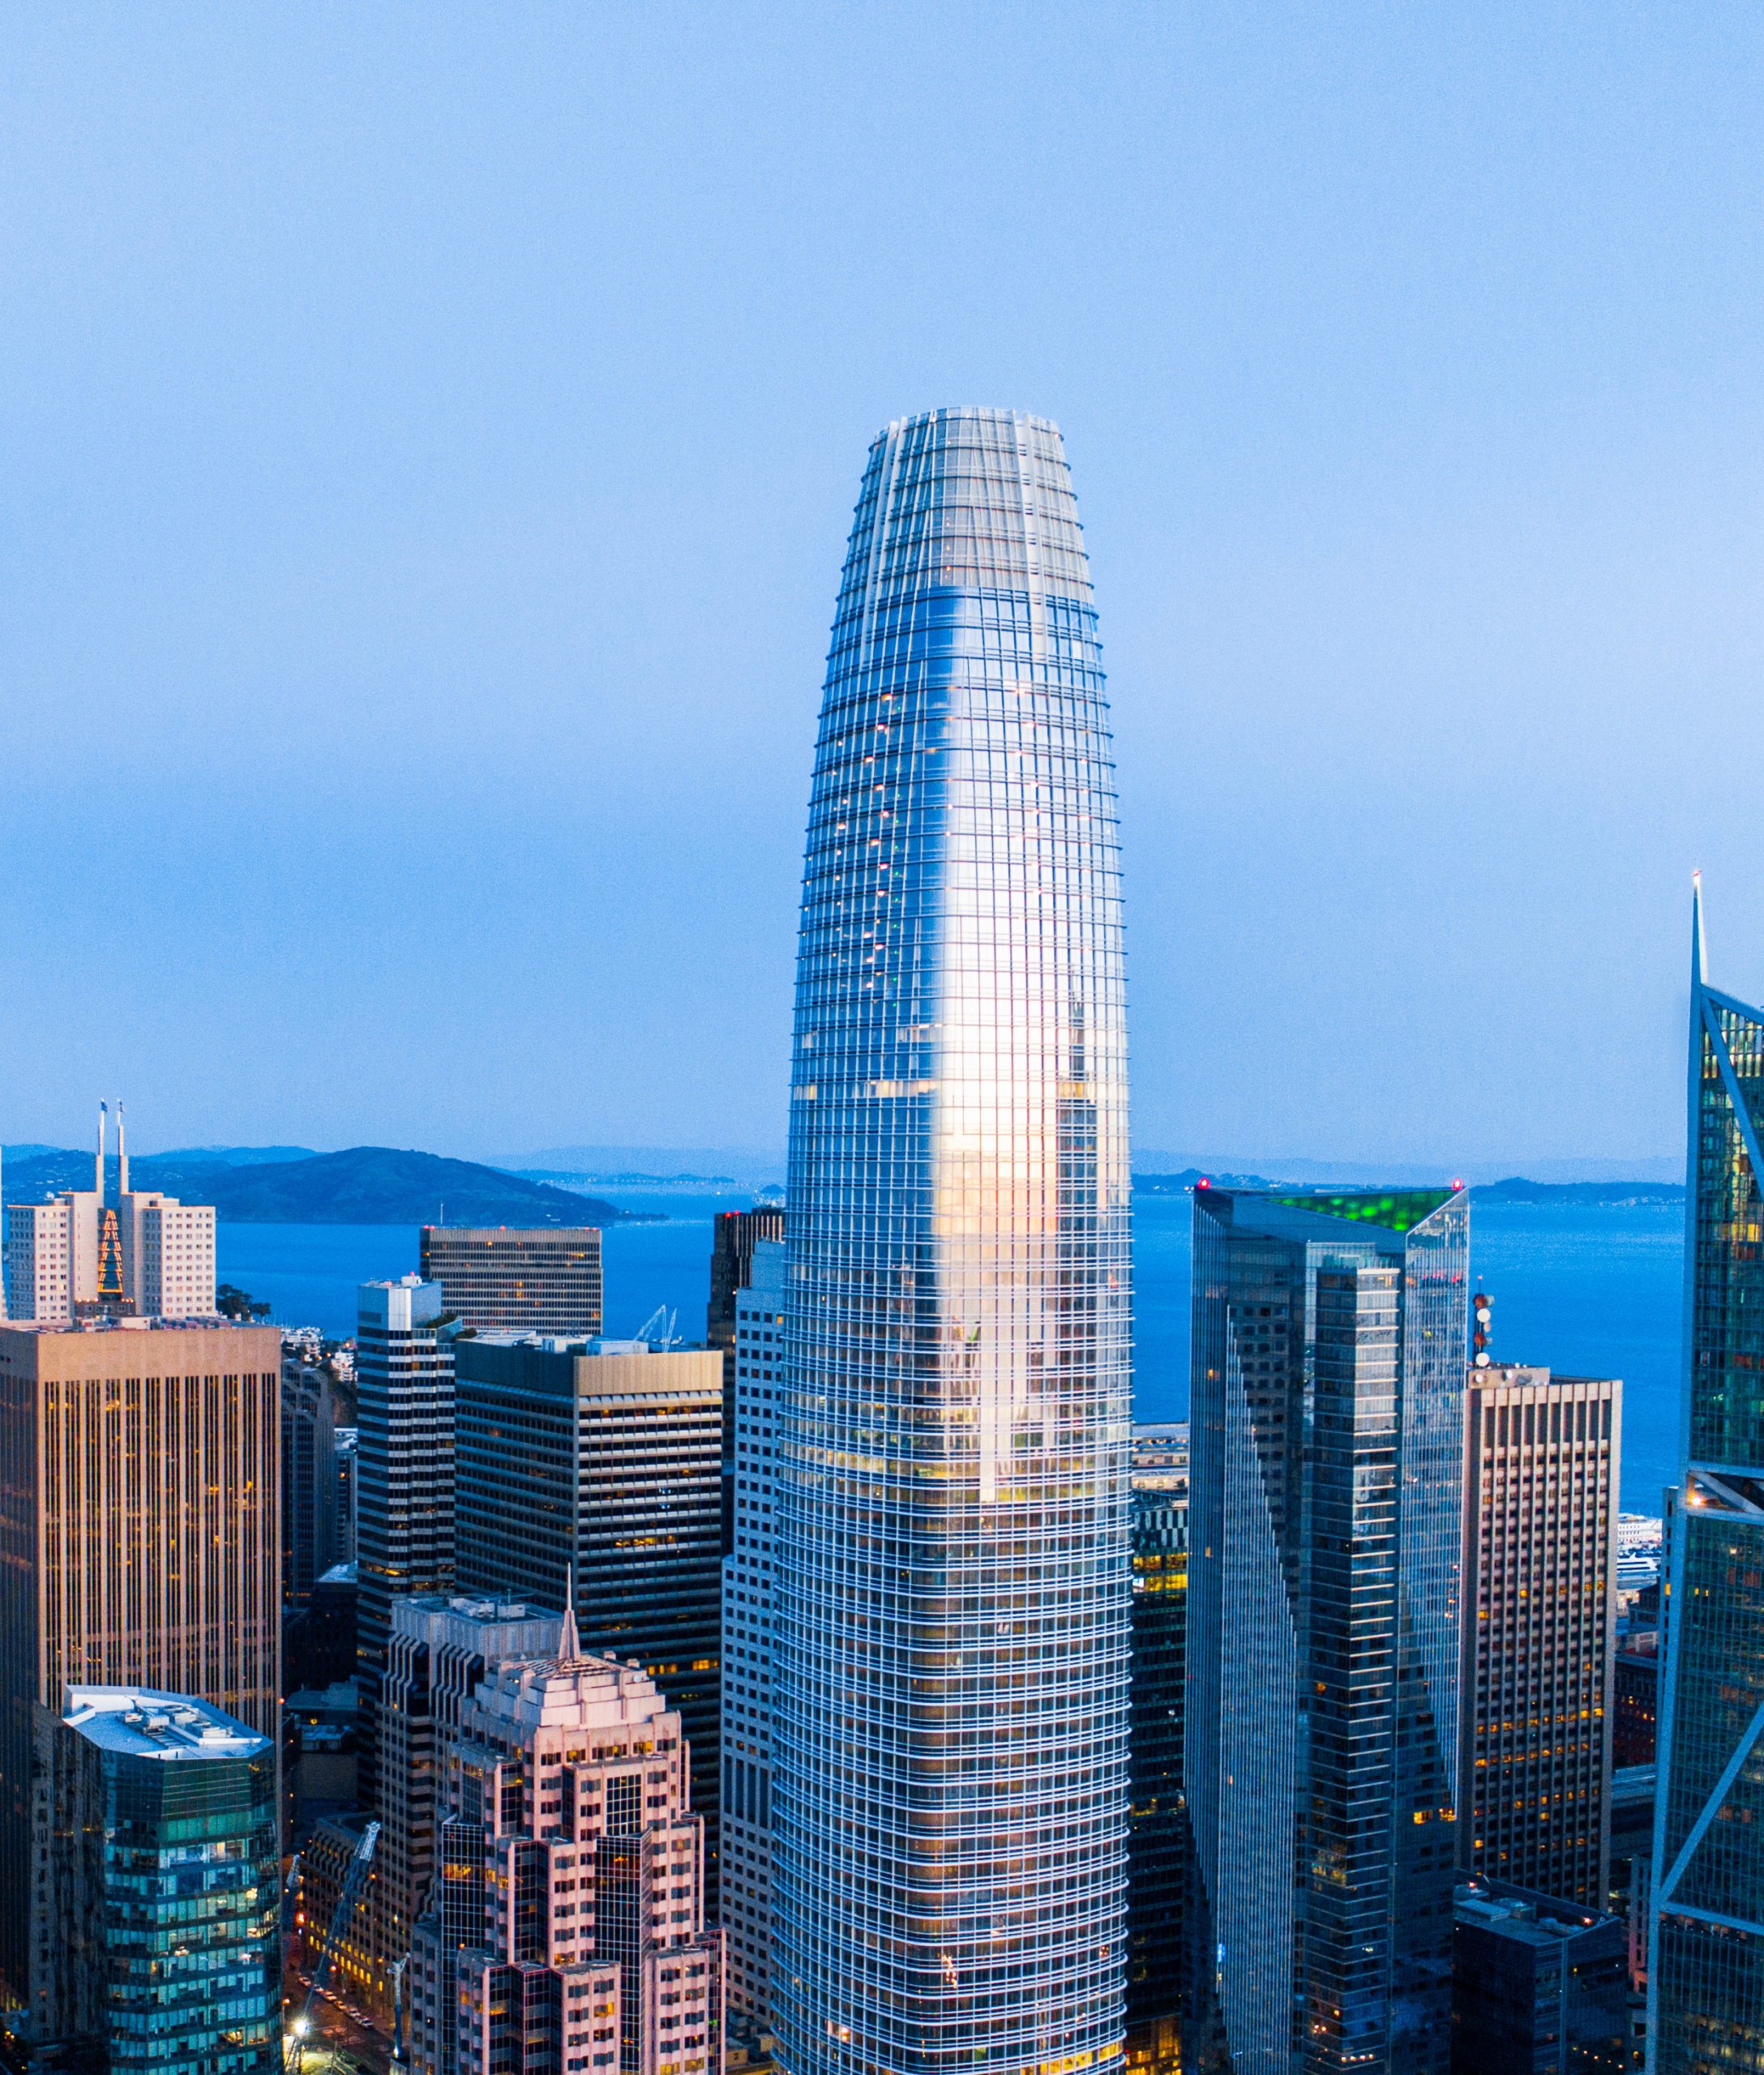 Salesforce Tower overlooking San Francisco in the evening.